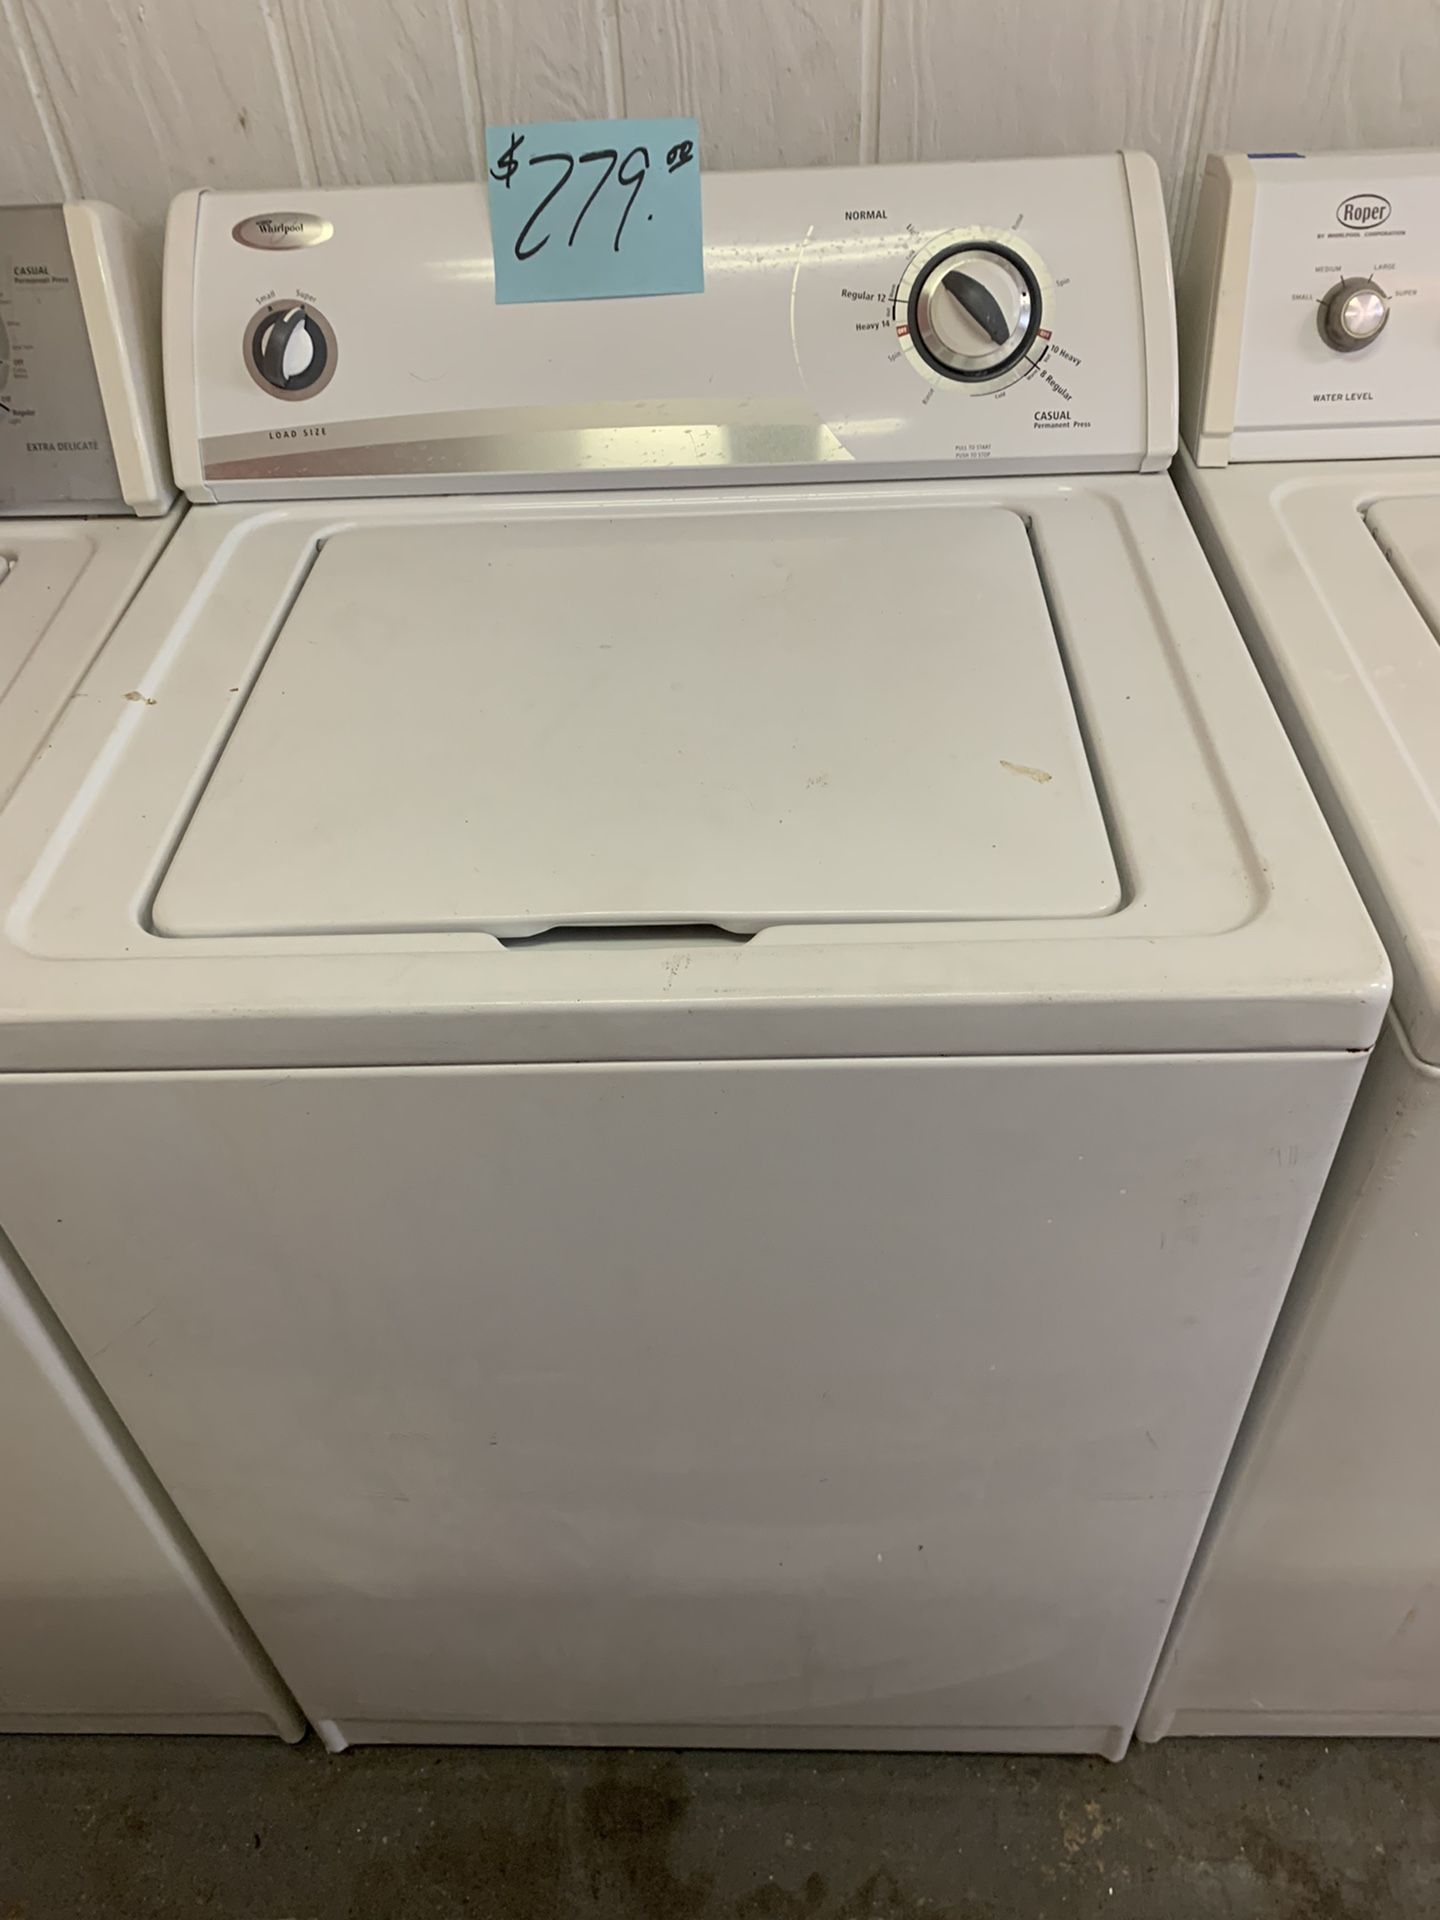 Whirlpool Washing Machine Washer White Super Size Excellent  .   Warranty  . Delivery Available . 2203 Fowler St. 33901